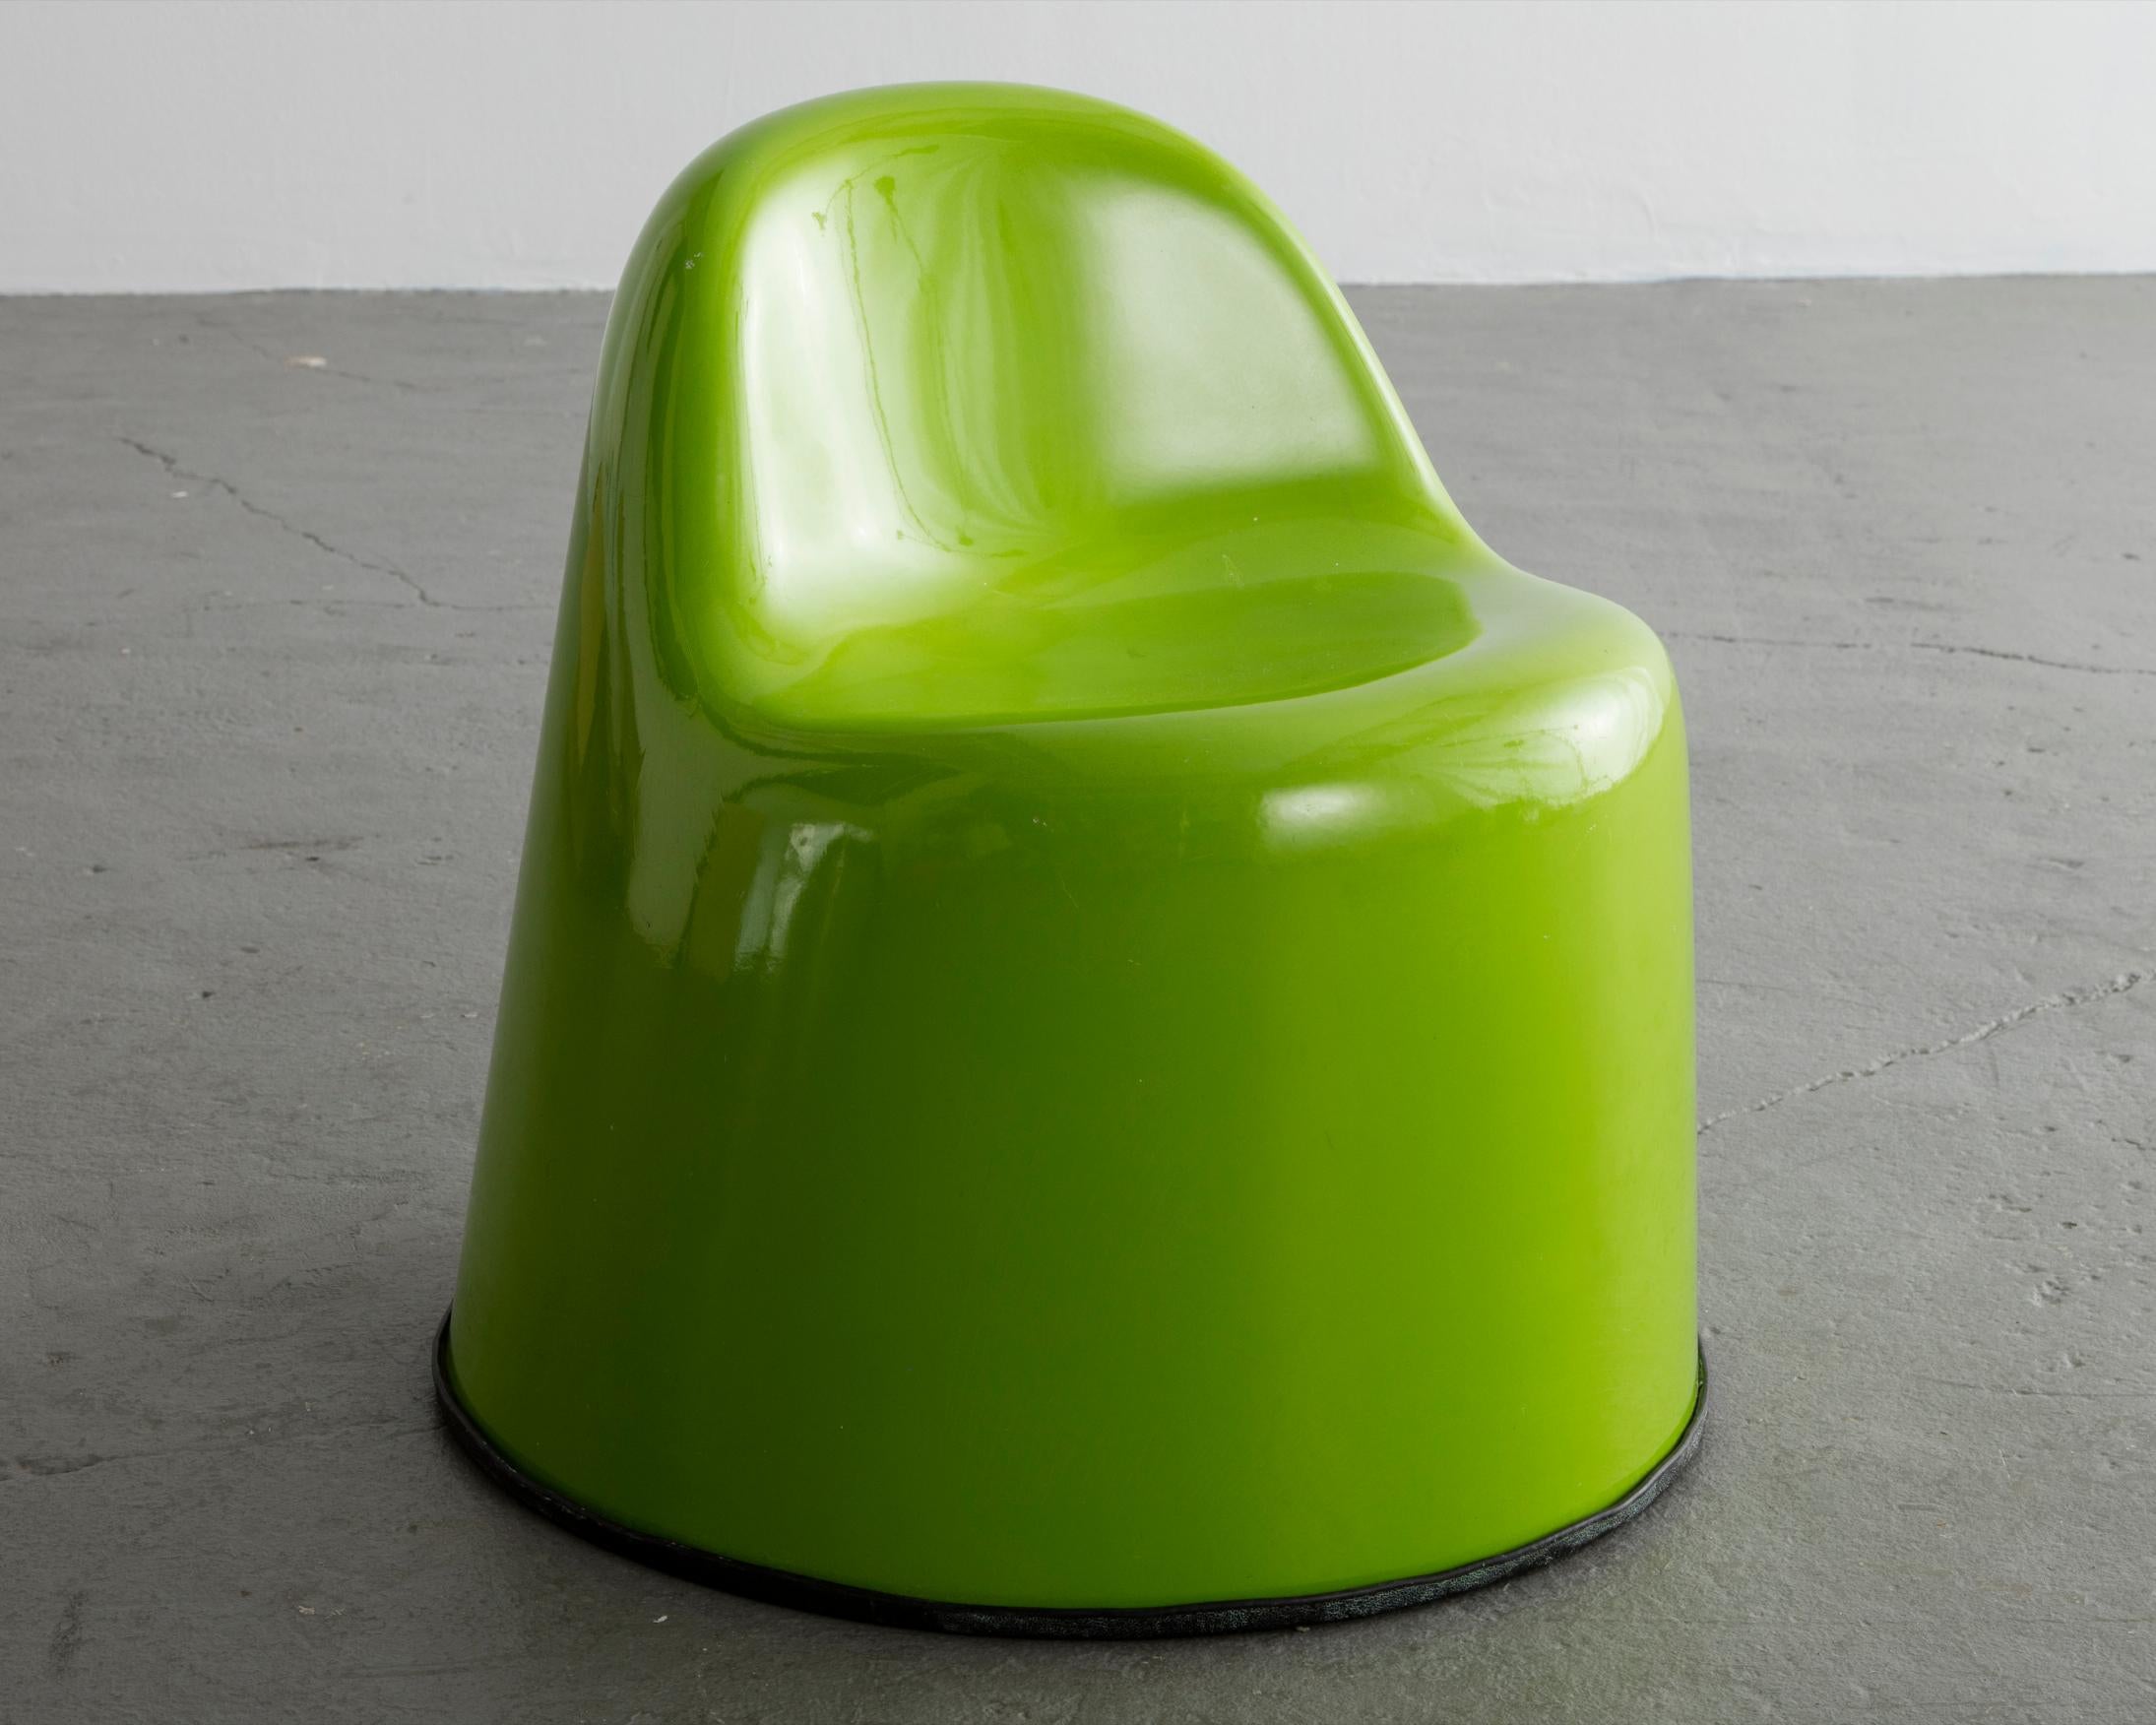 Baby Molar chair in gel-coated, fiberglass-reinforced plastic. Designed and made by Wendell Castle, Rochester, New York, 1969.